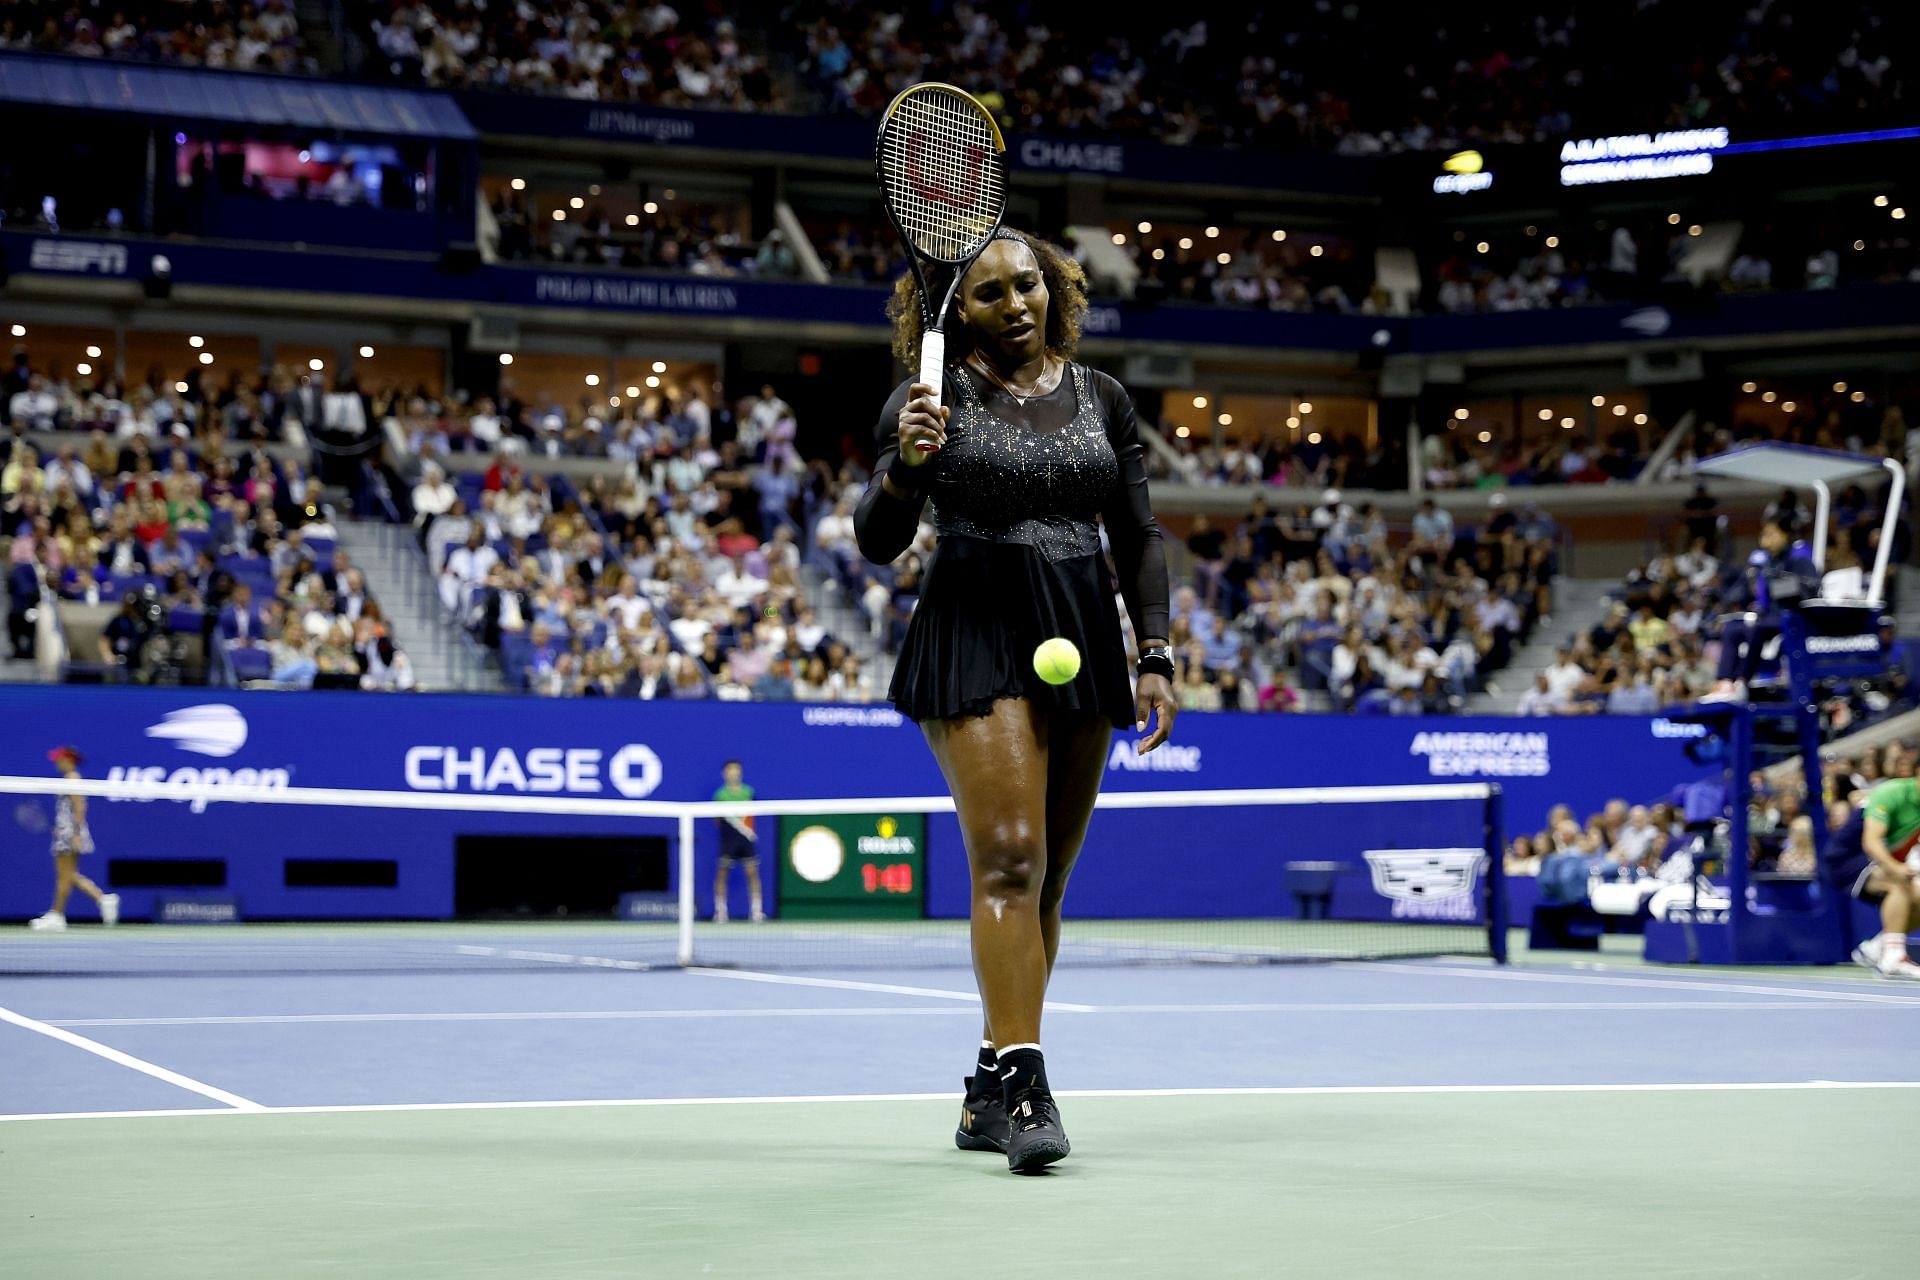 Serena Williams at the 2022 US Open - Day 5